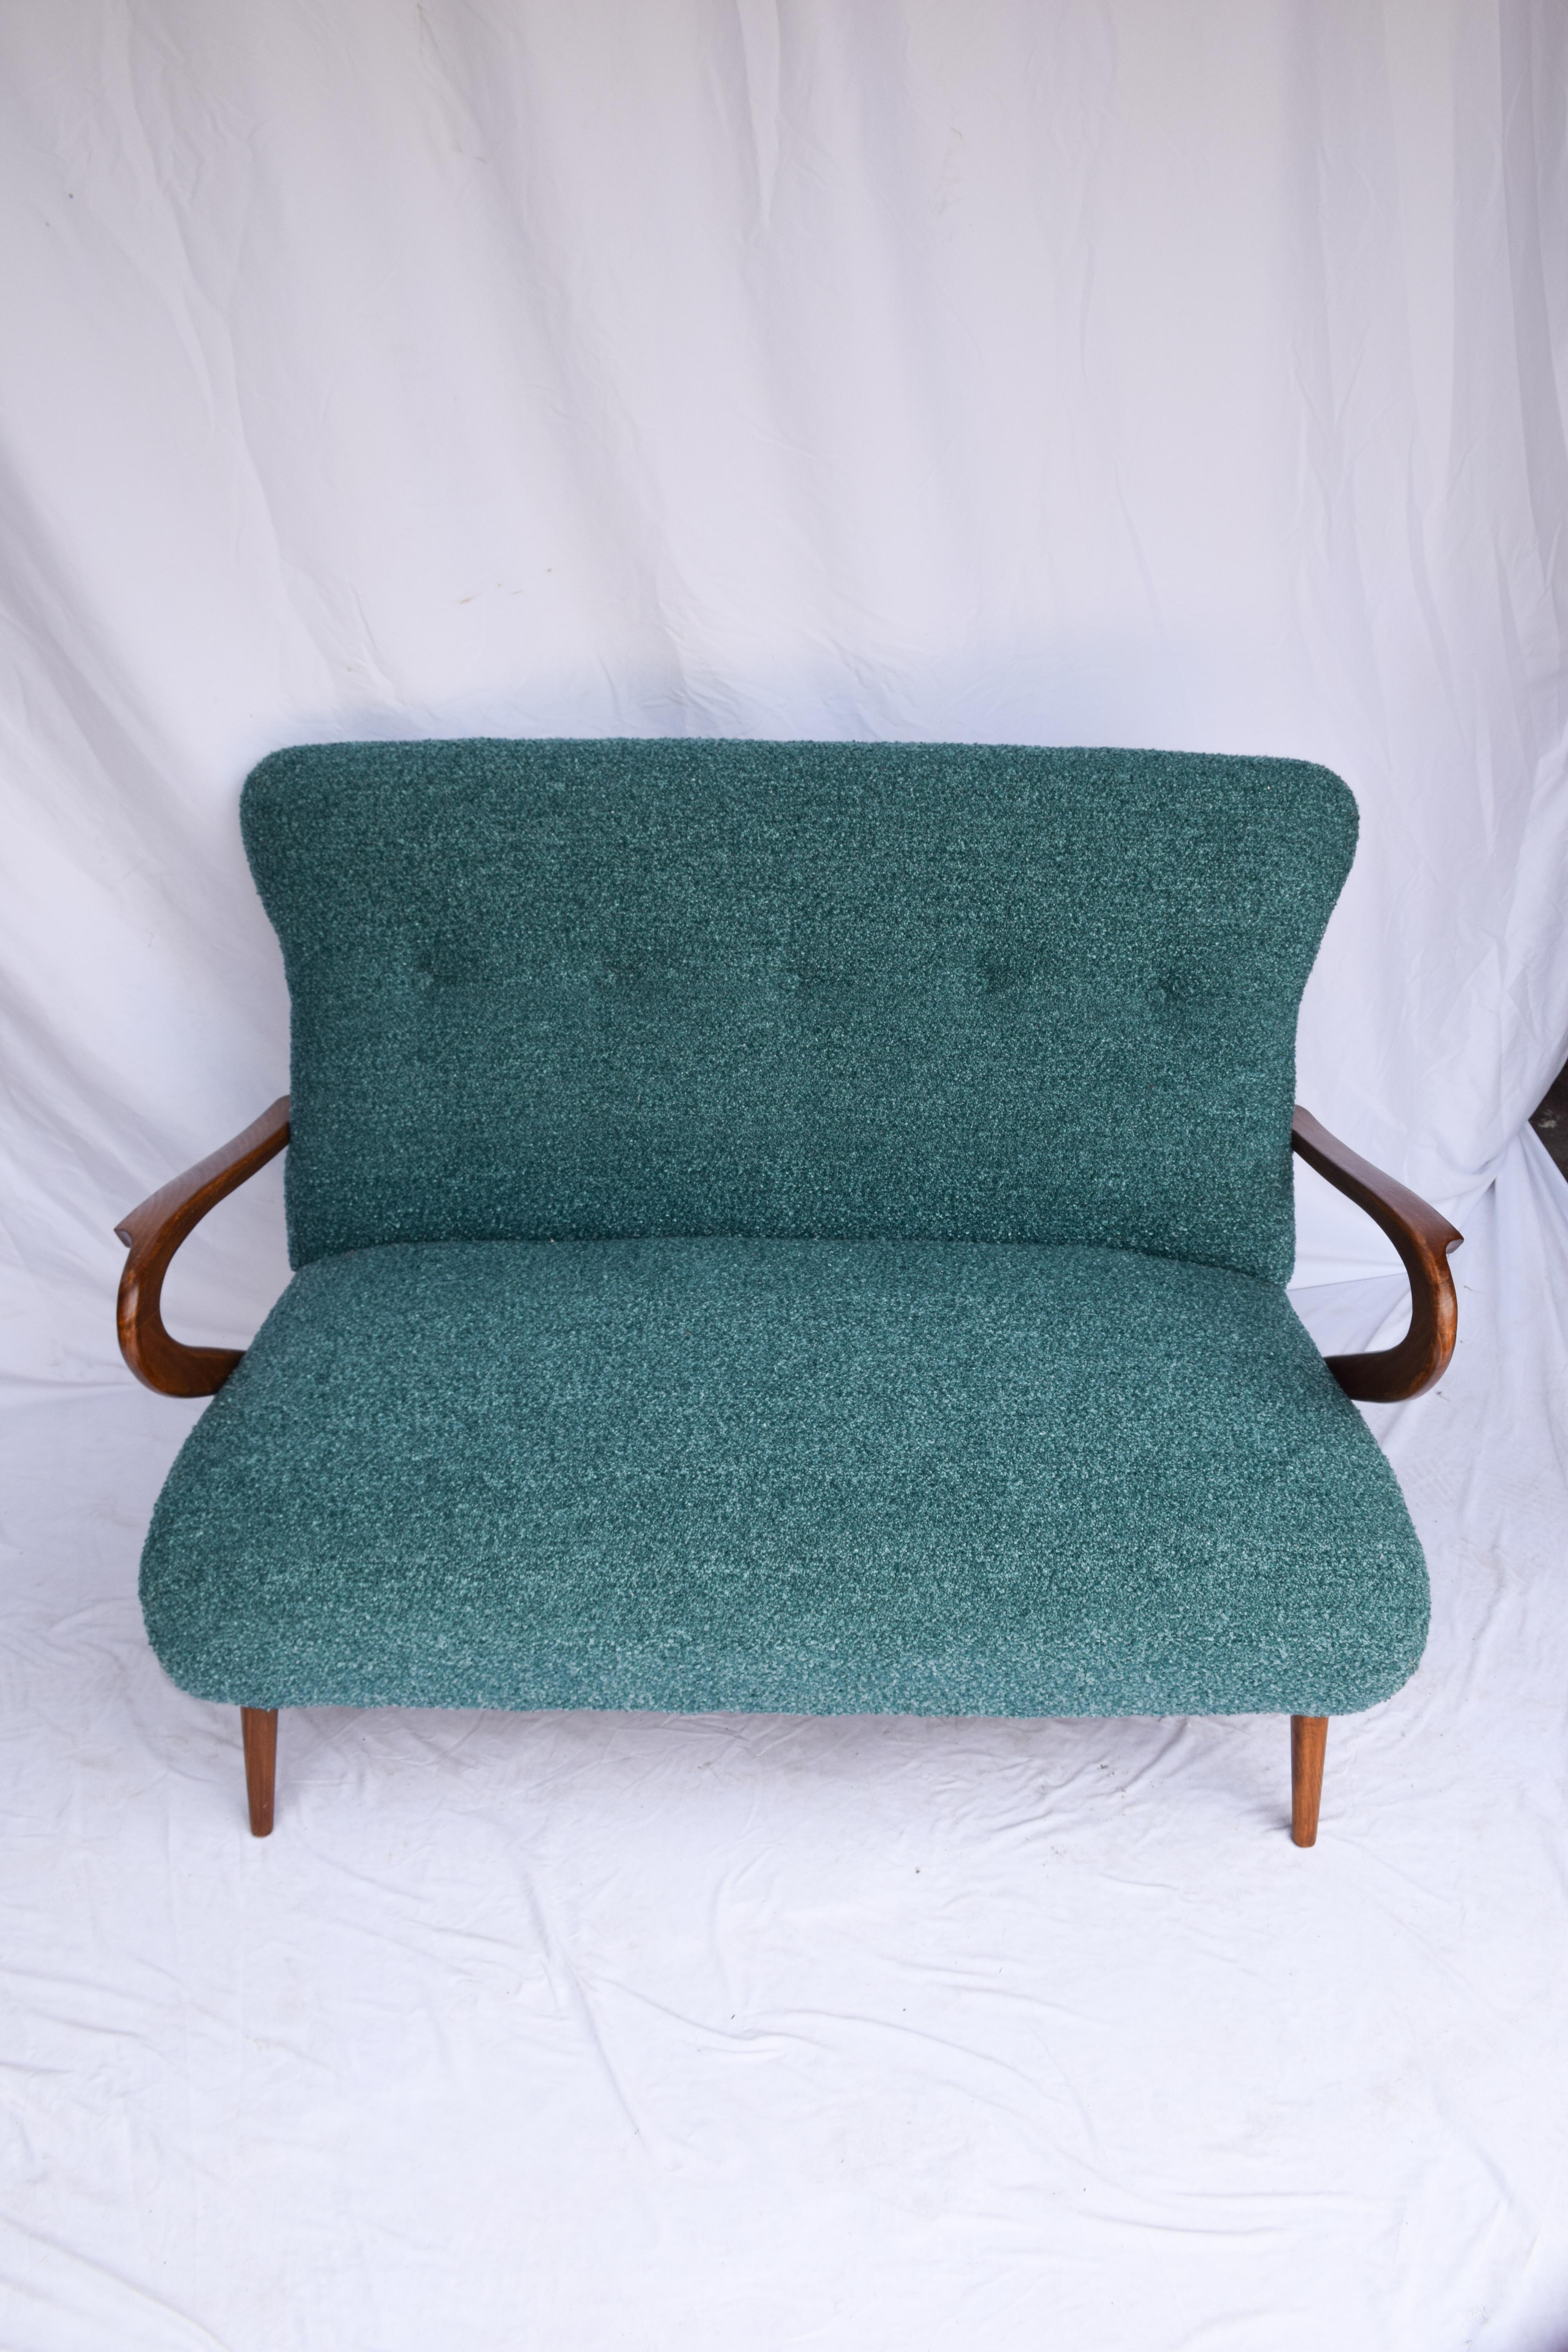 Italian Mid-Century Settee - Sofà Carlo Mollino Style in Teal Green In Good Condition For Sale In Houston, TX